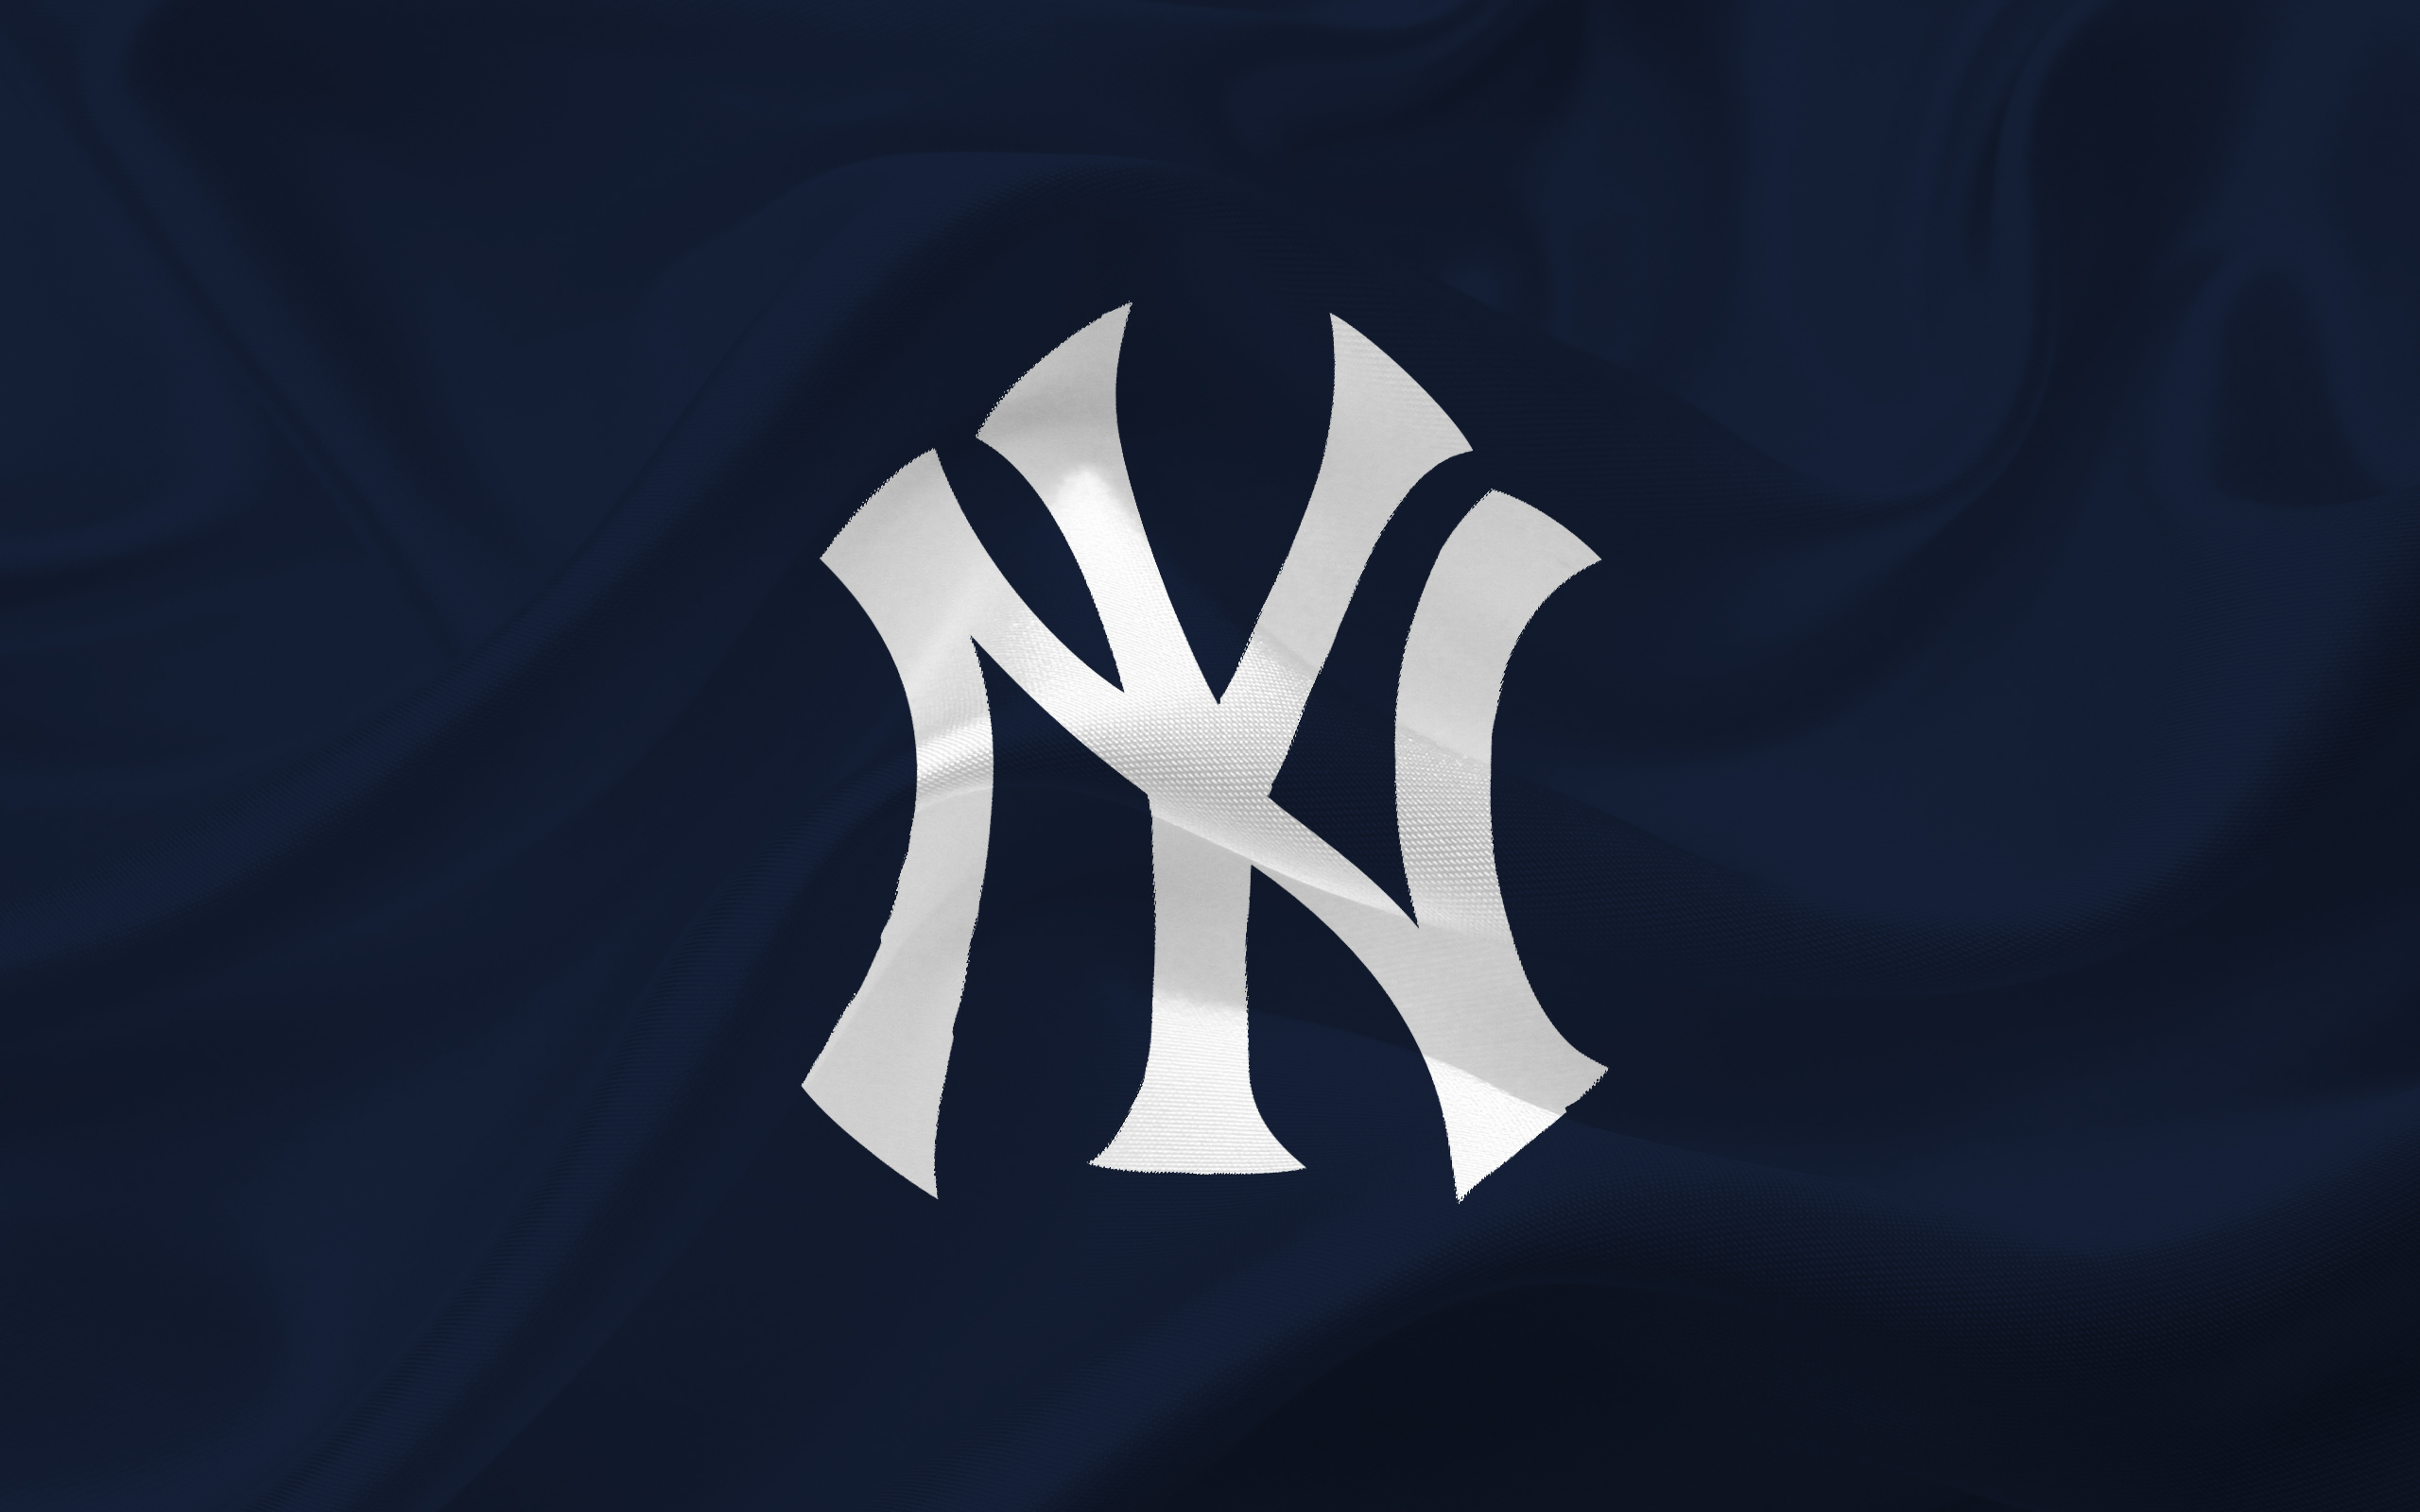 25 Top yankees desktop background You Can Use It At No Cost - Aesthetic ...